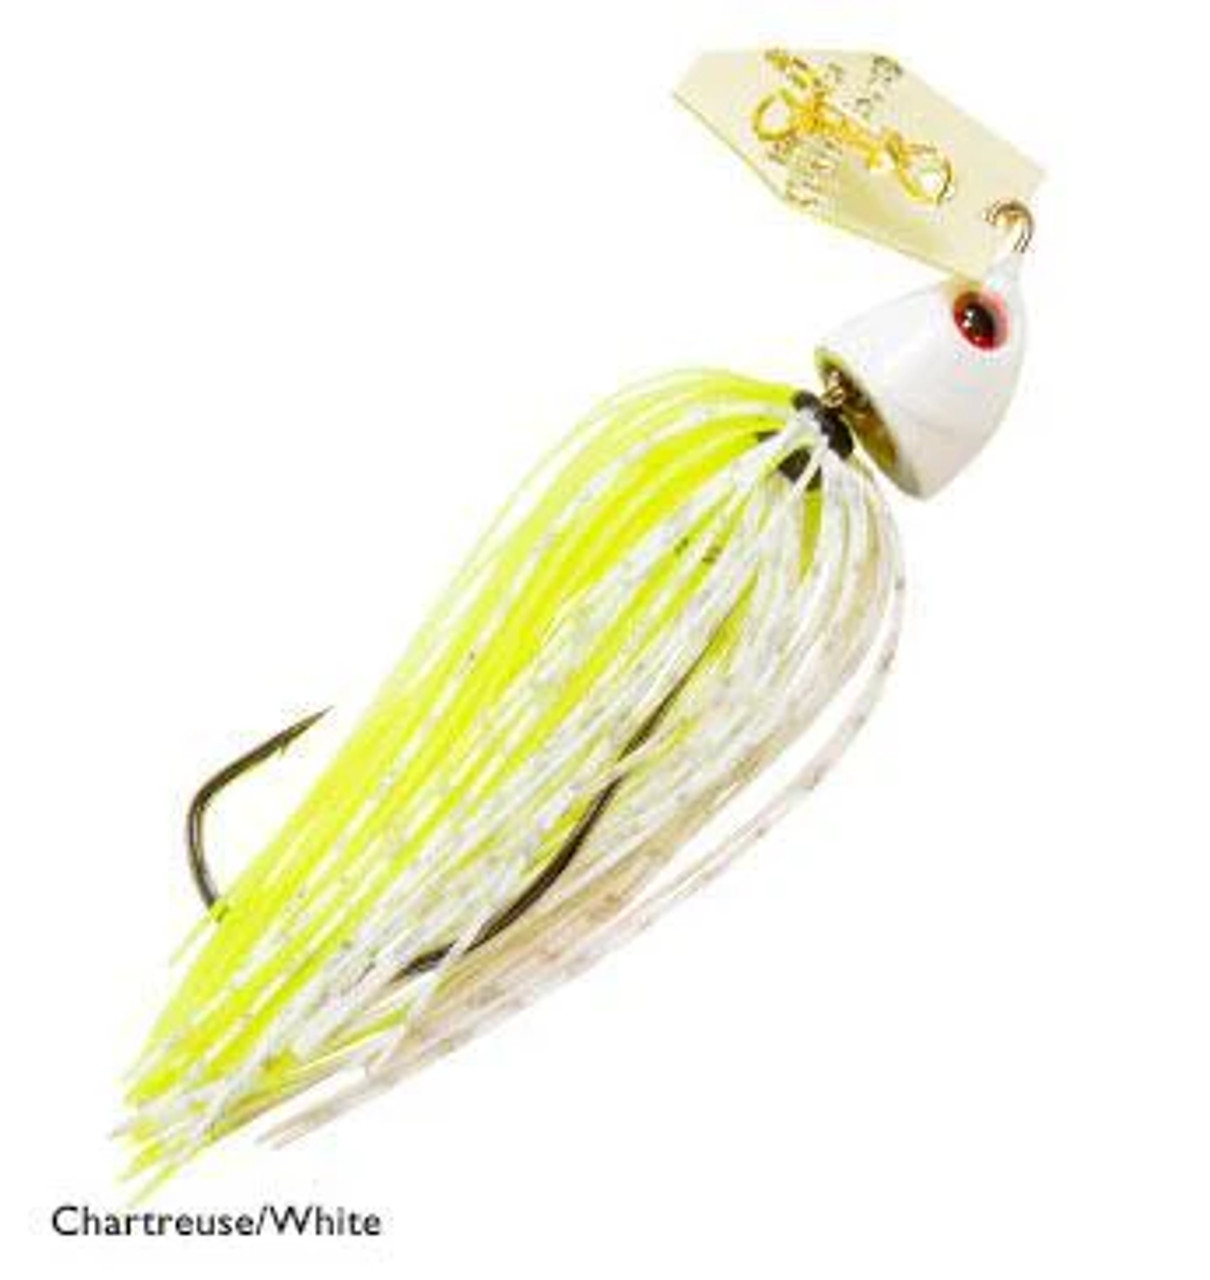 Z-Man Freedom ChatterBait 1/2 Oz, Chartreuse/White